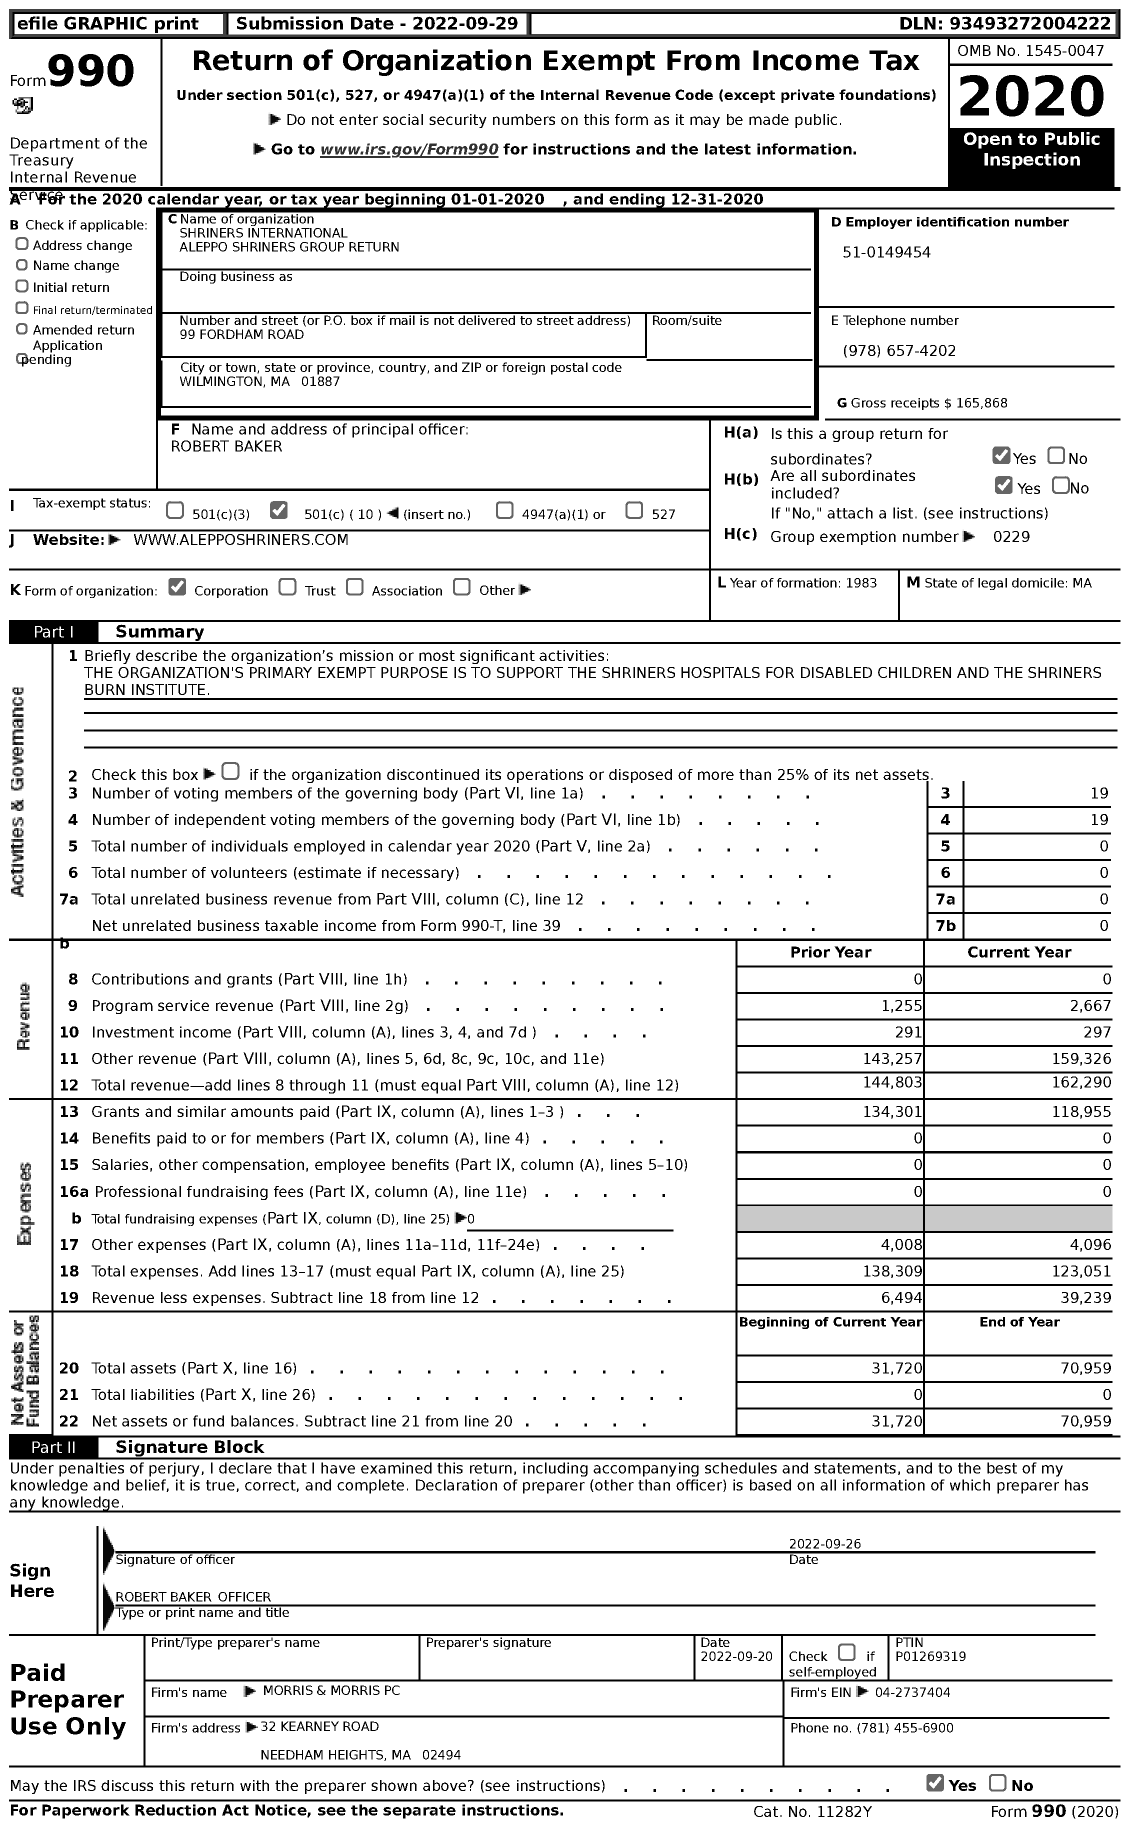 Image of first page of 2020 Form 990 for Shriners International - Aleppo Shriners Group Return